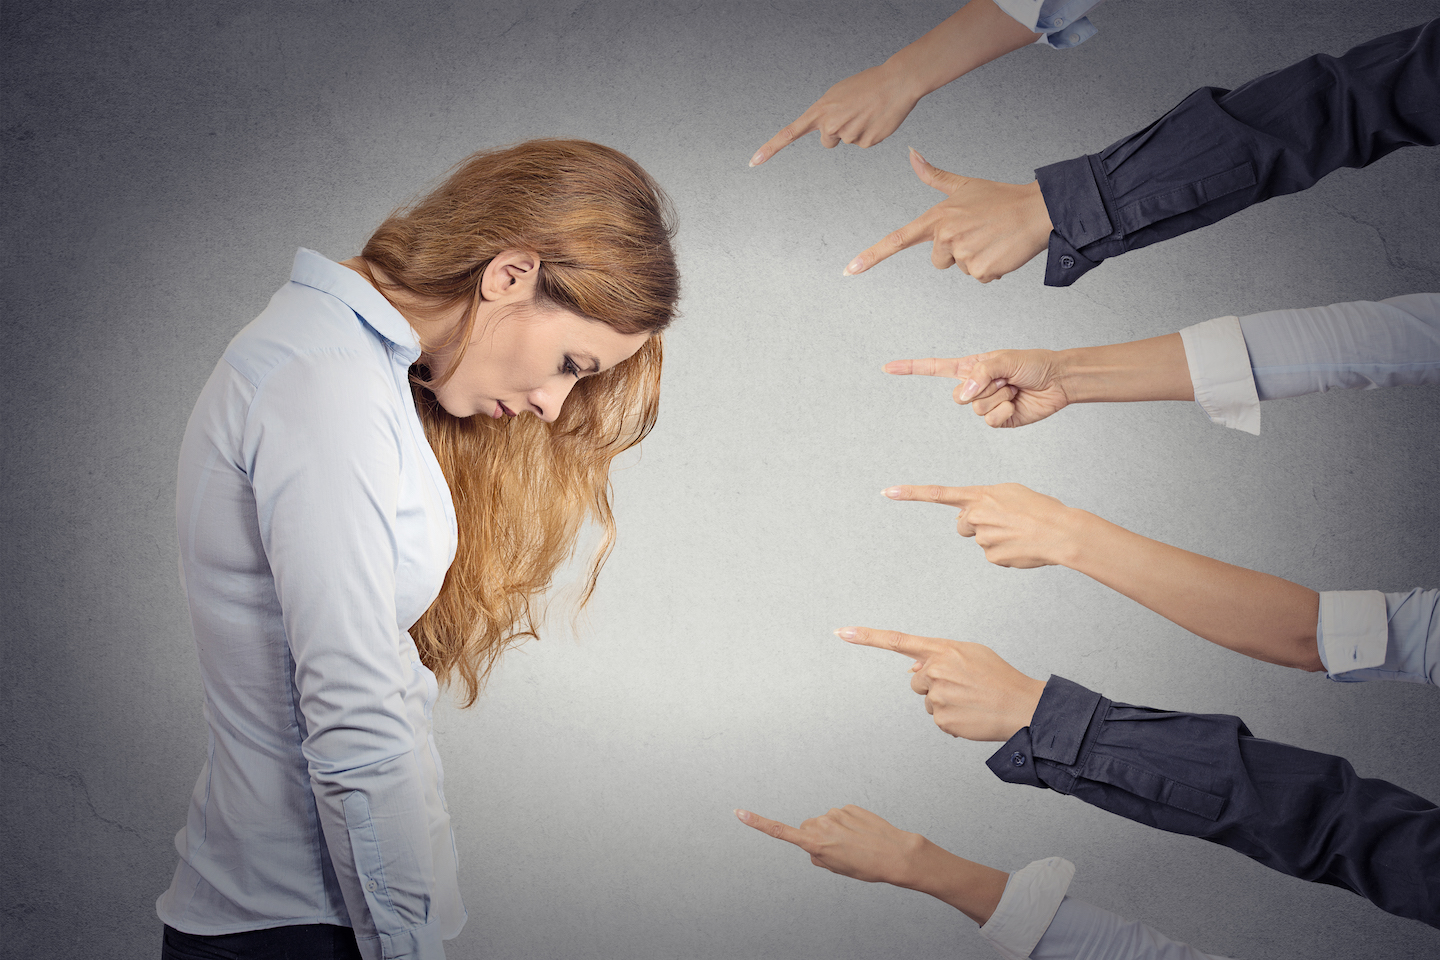 Management 101: Upholding the line of workplace bullying